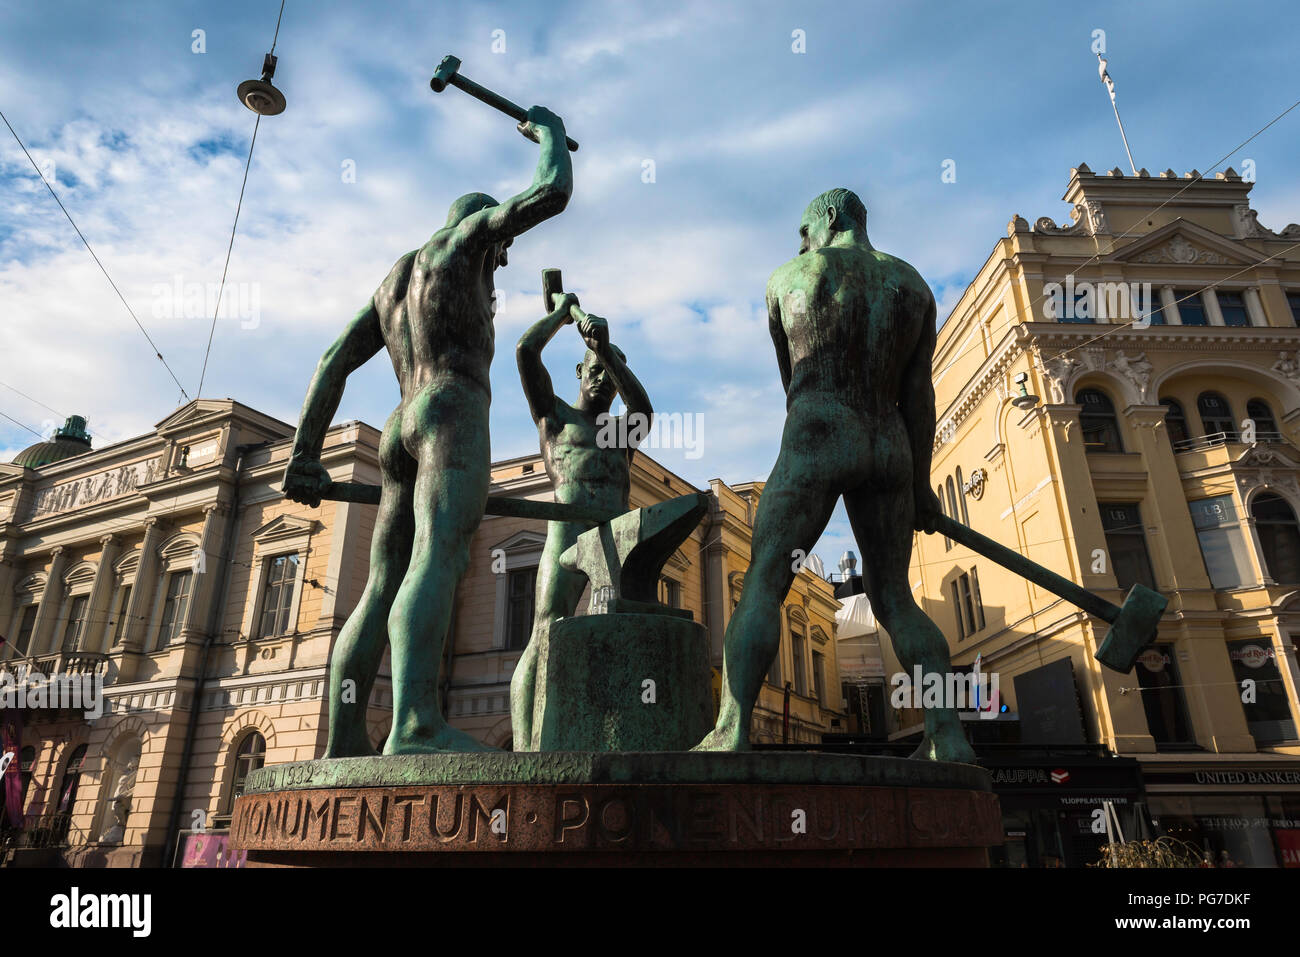 Helsinki statue, the famous statue titled 'The Three Smiths' sited between Aleksanterinkatu and Mannerheimintie in Helsinki city center, Finland. Stock Photo